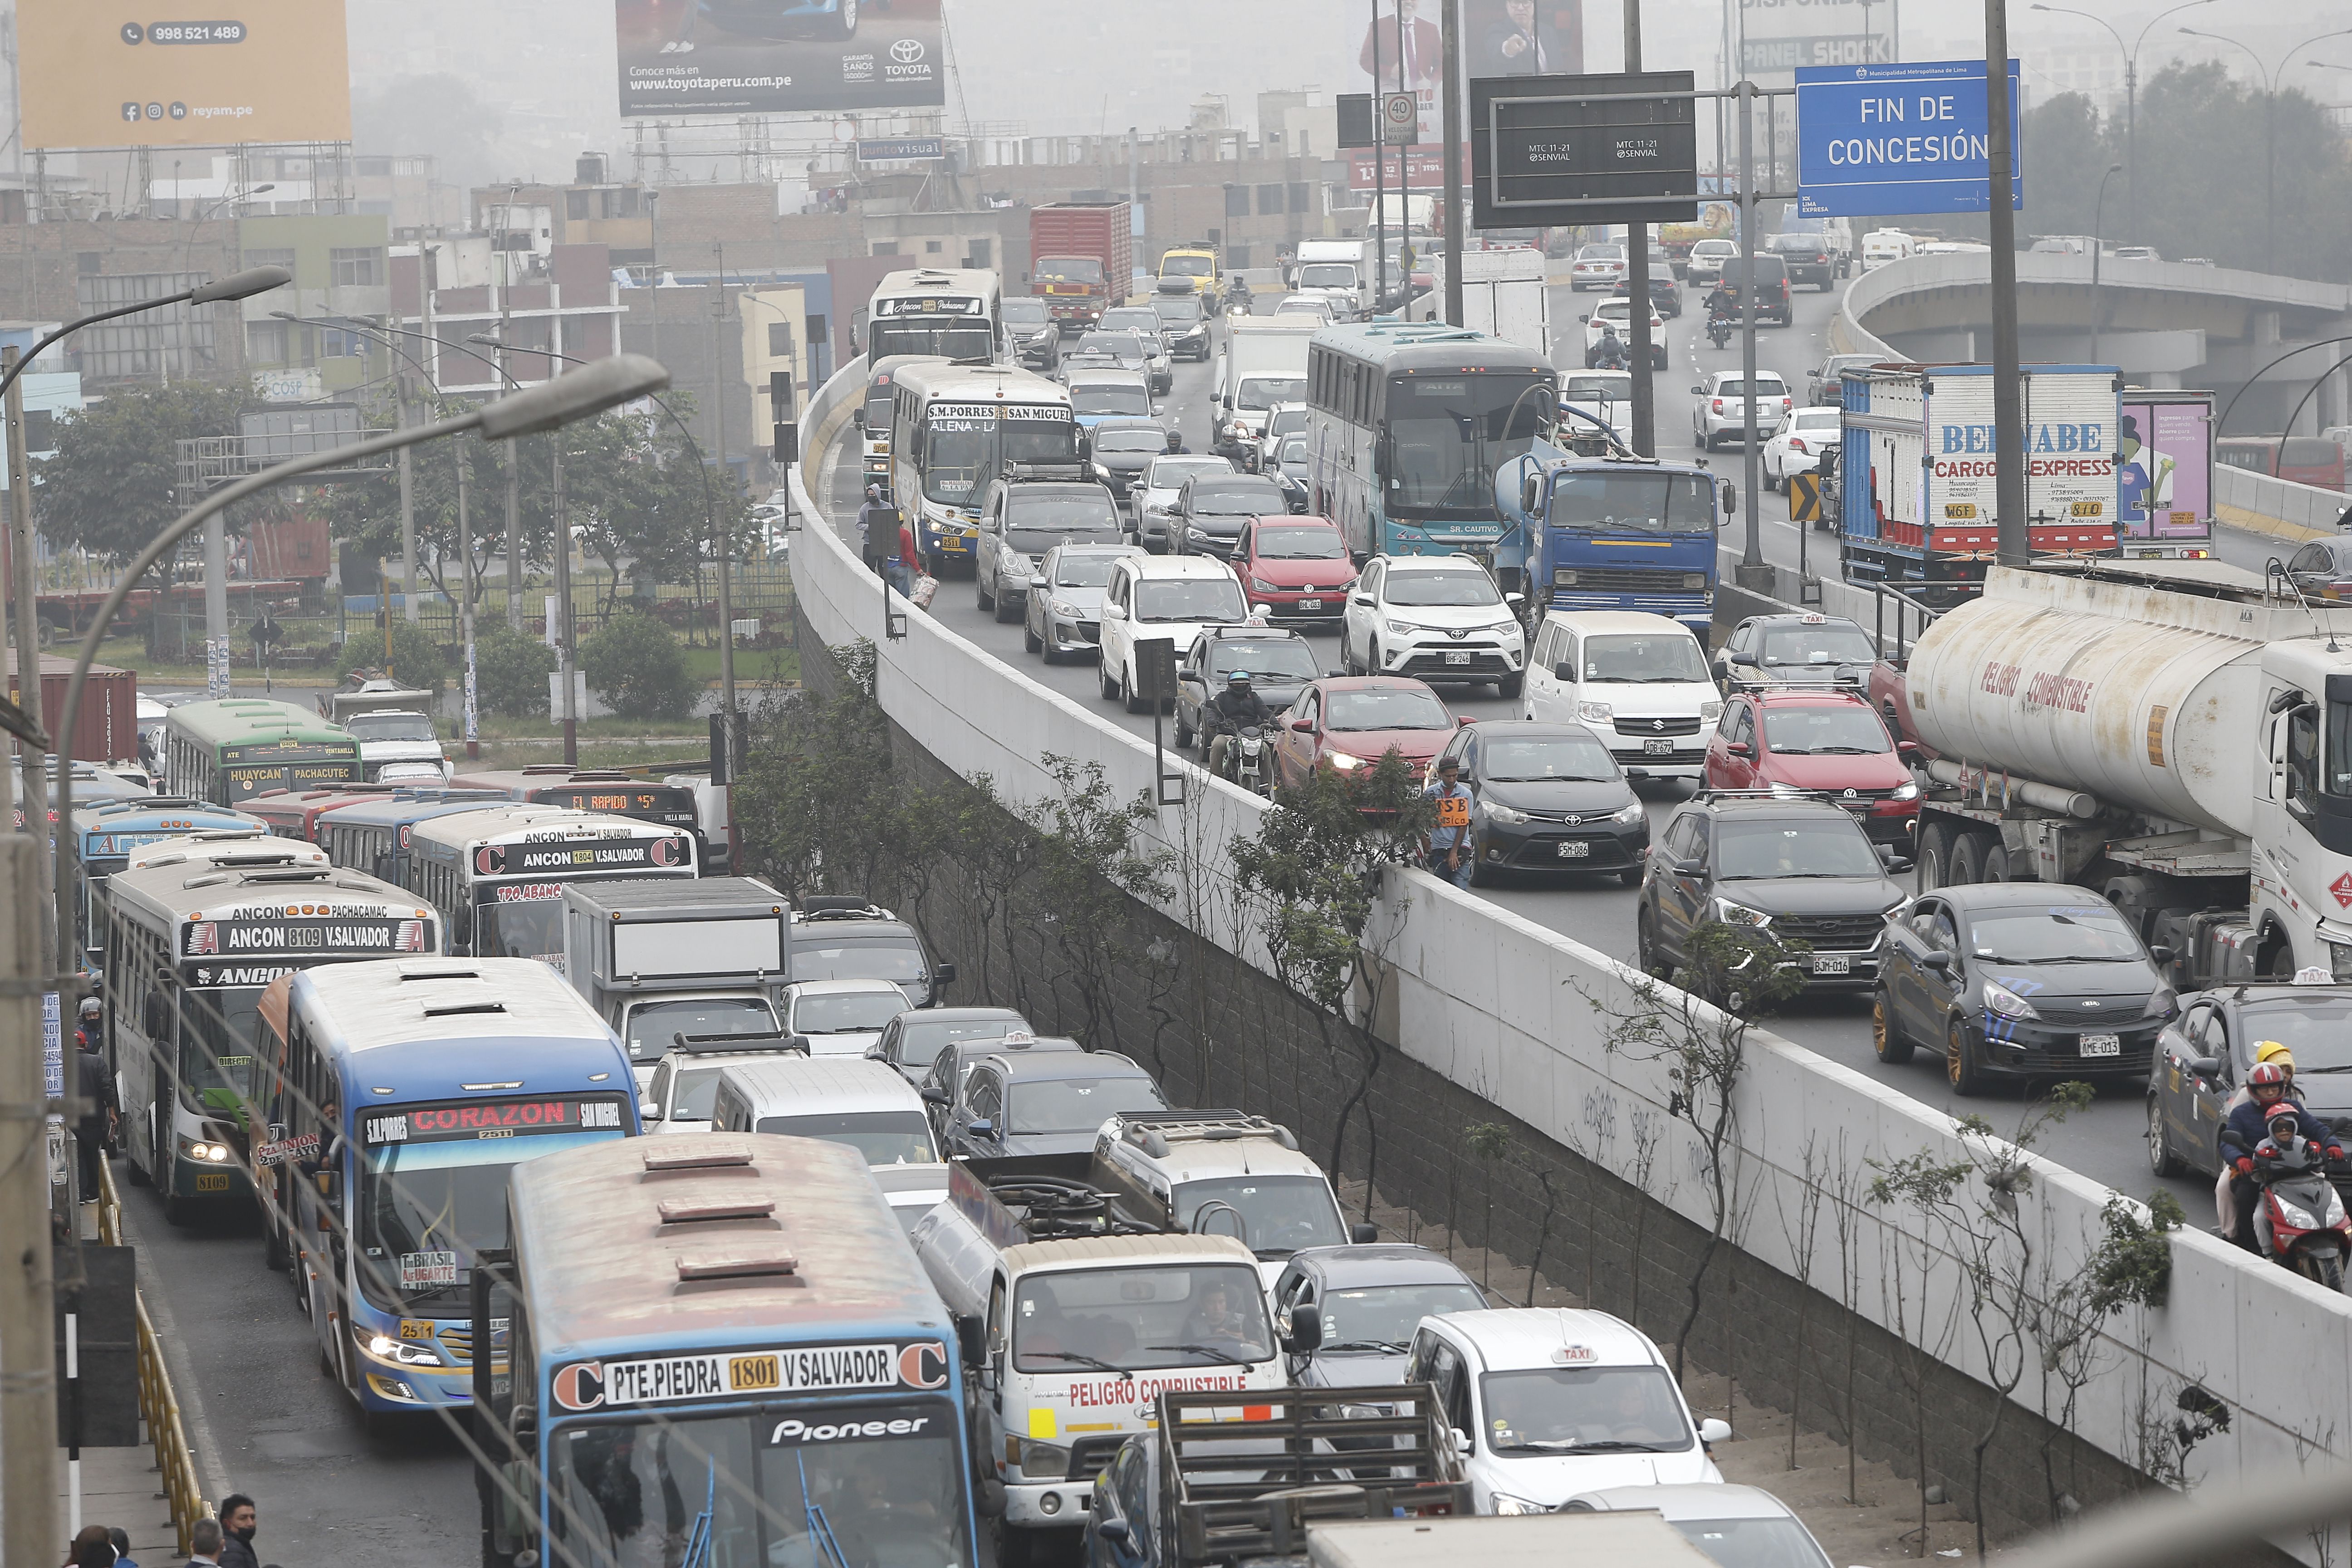 Latin Americans spend almost a month a year in transportation, according to study